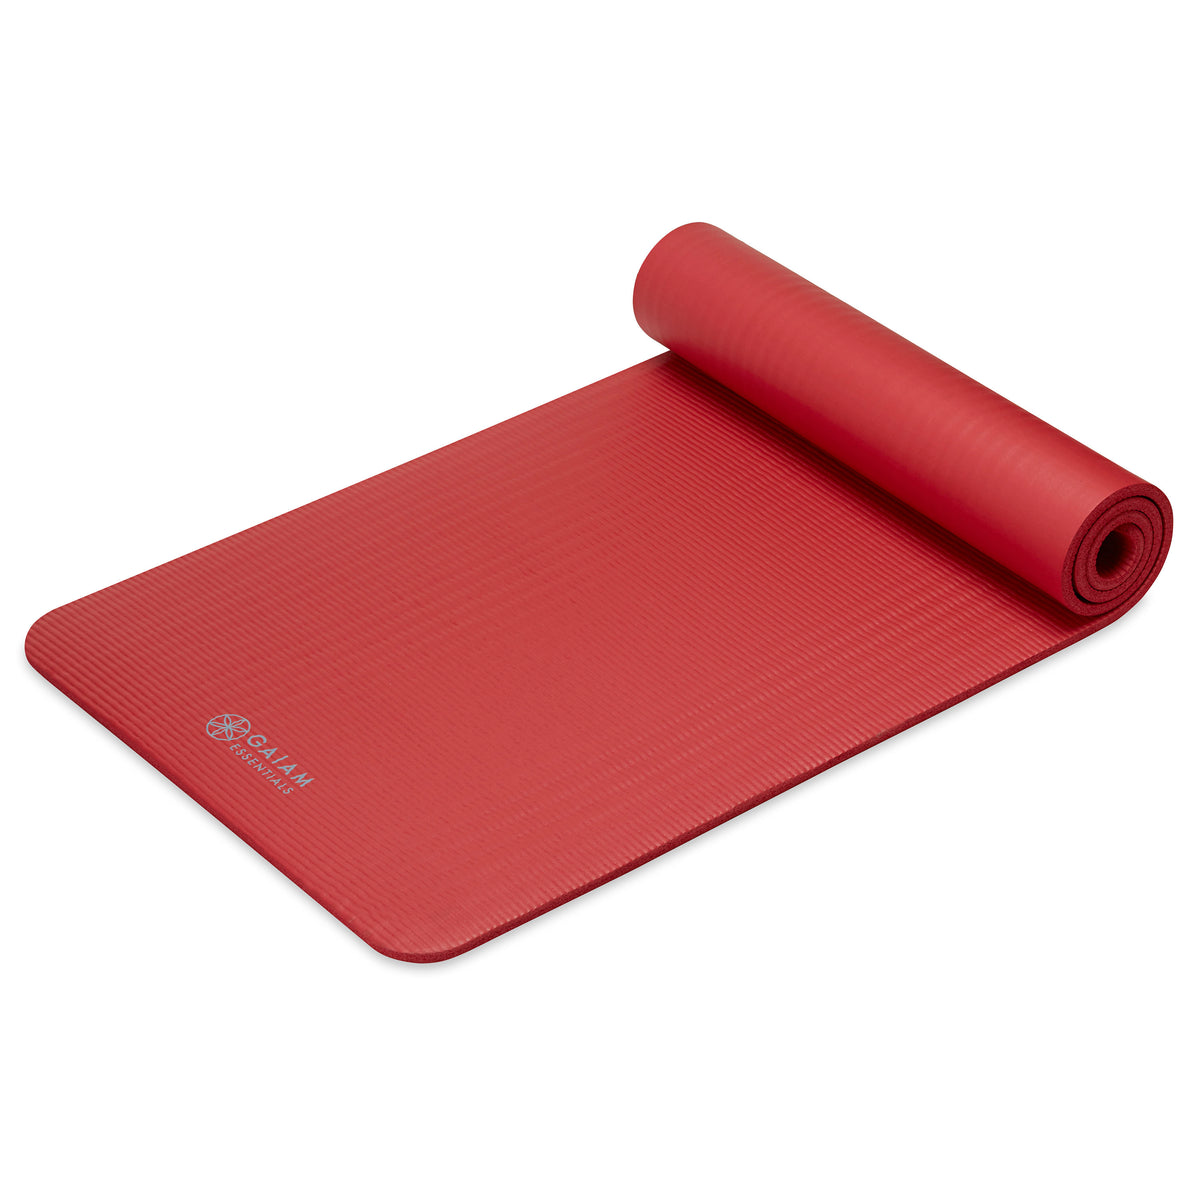 50 Ways to Reuse Your Yoga or Fitness Mat - Gaiam